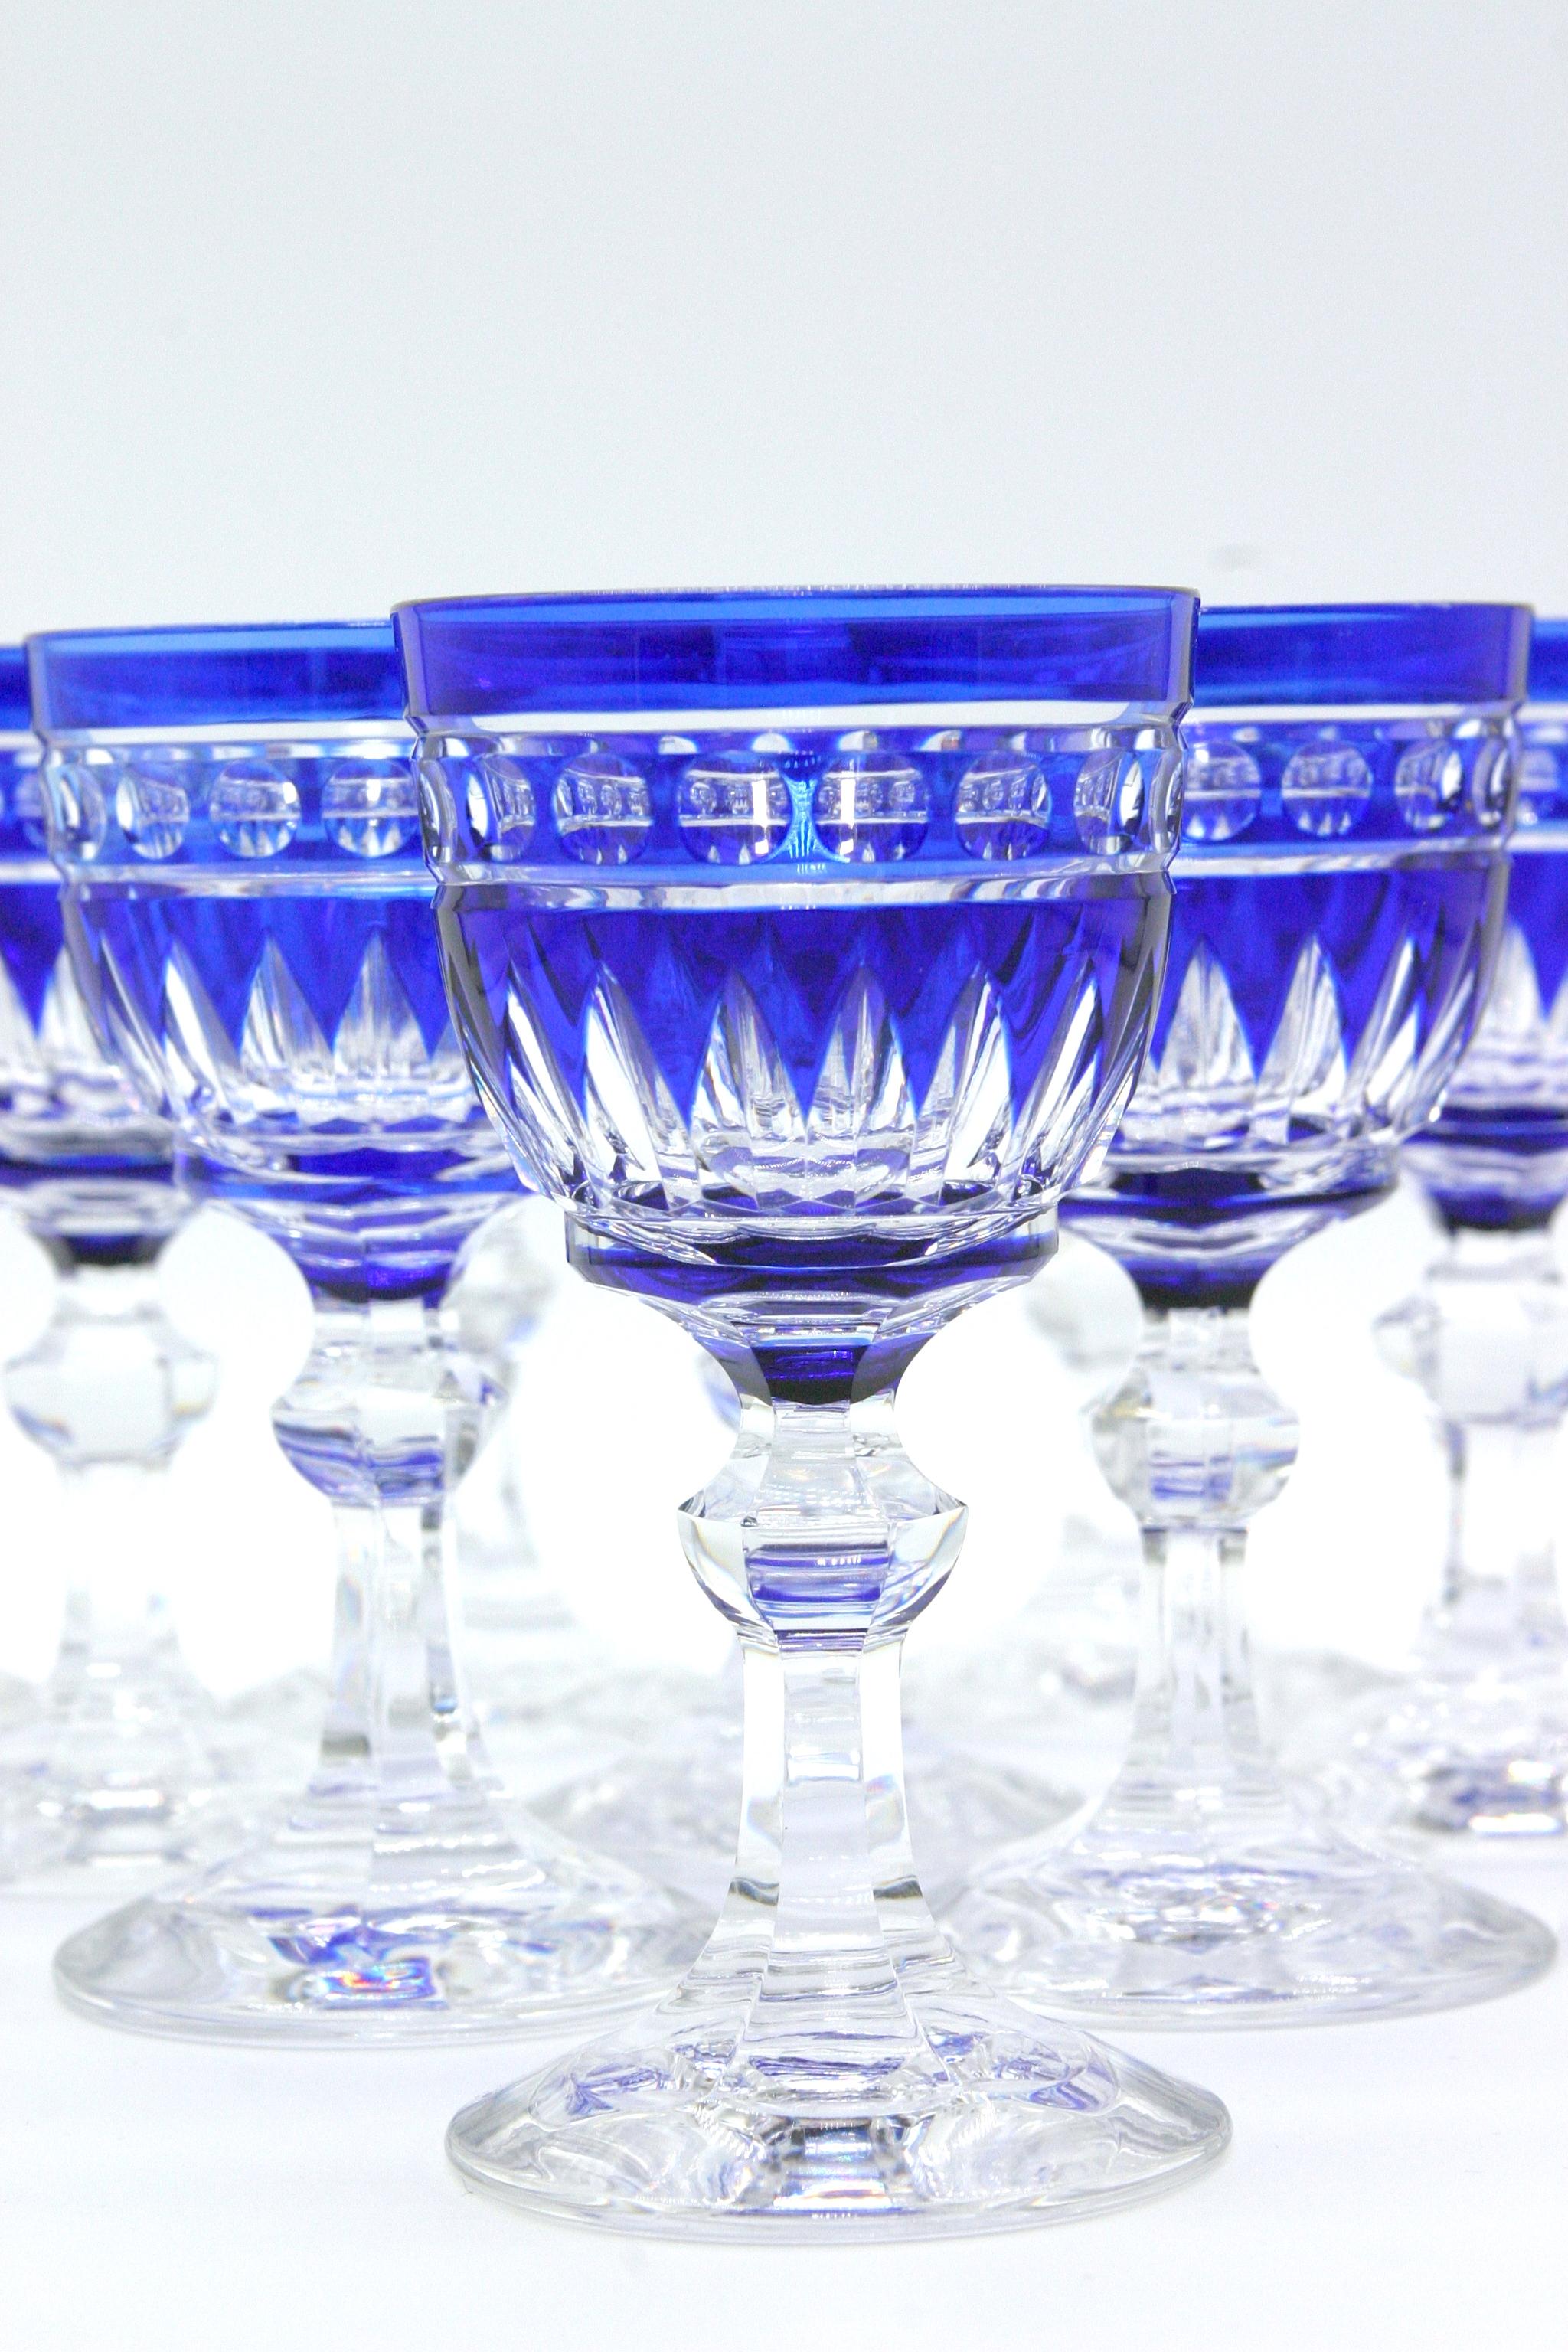 Exquisite set of Val Saint Lambert Barware / tableware cobalt blue crystal wine , water service for 10 people . Val crystal is regarded as some of the most magnificent ever made and renowned for their exquisite color. This exquisite cut to clear